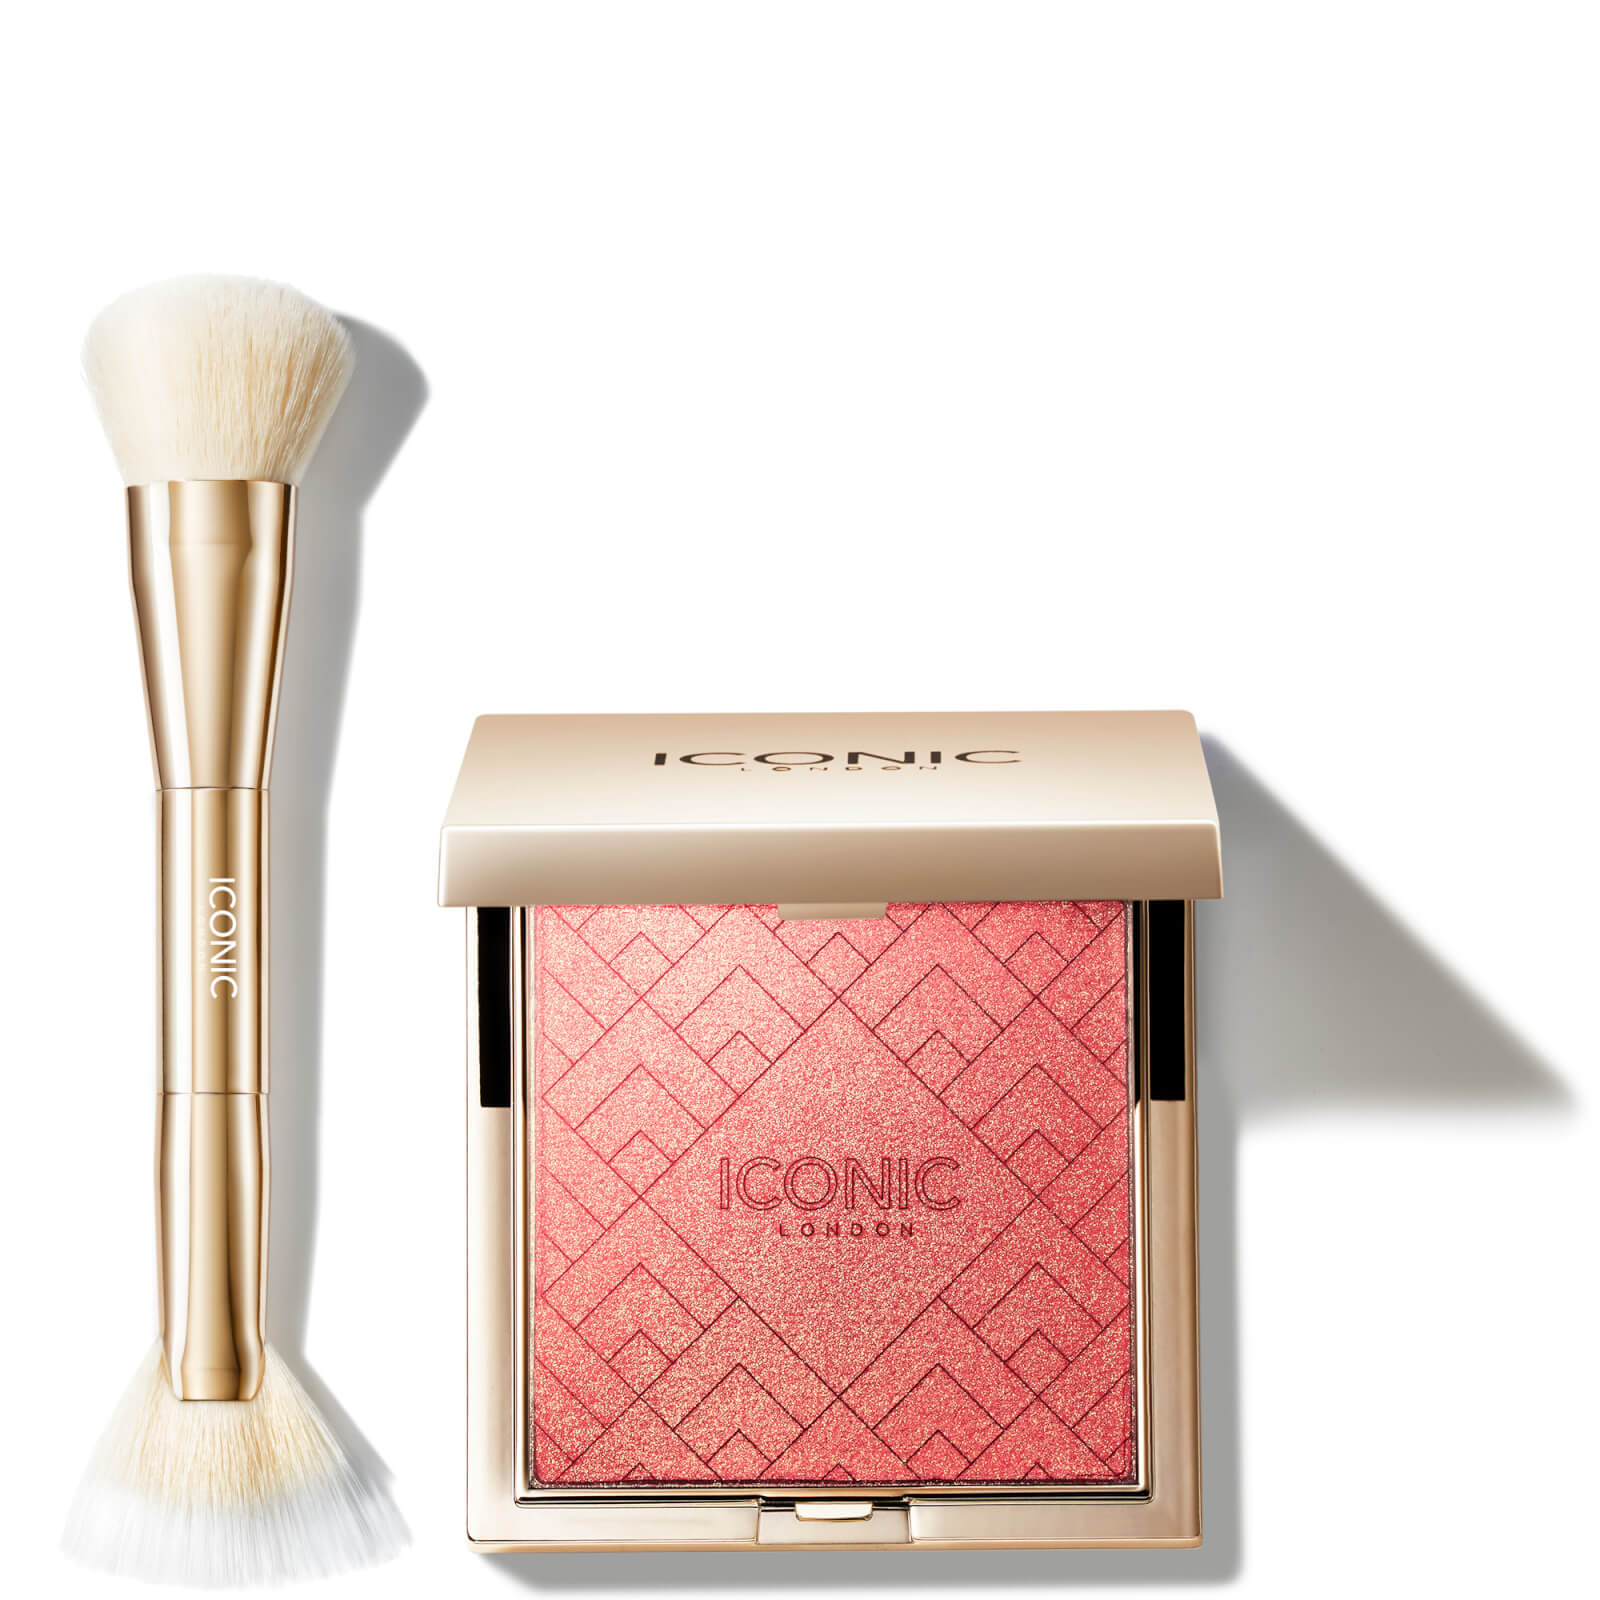 Iconic London Kissed By The Sun Multi-use Cheek Glow And Brush (various Shades) - Hot Stuff